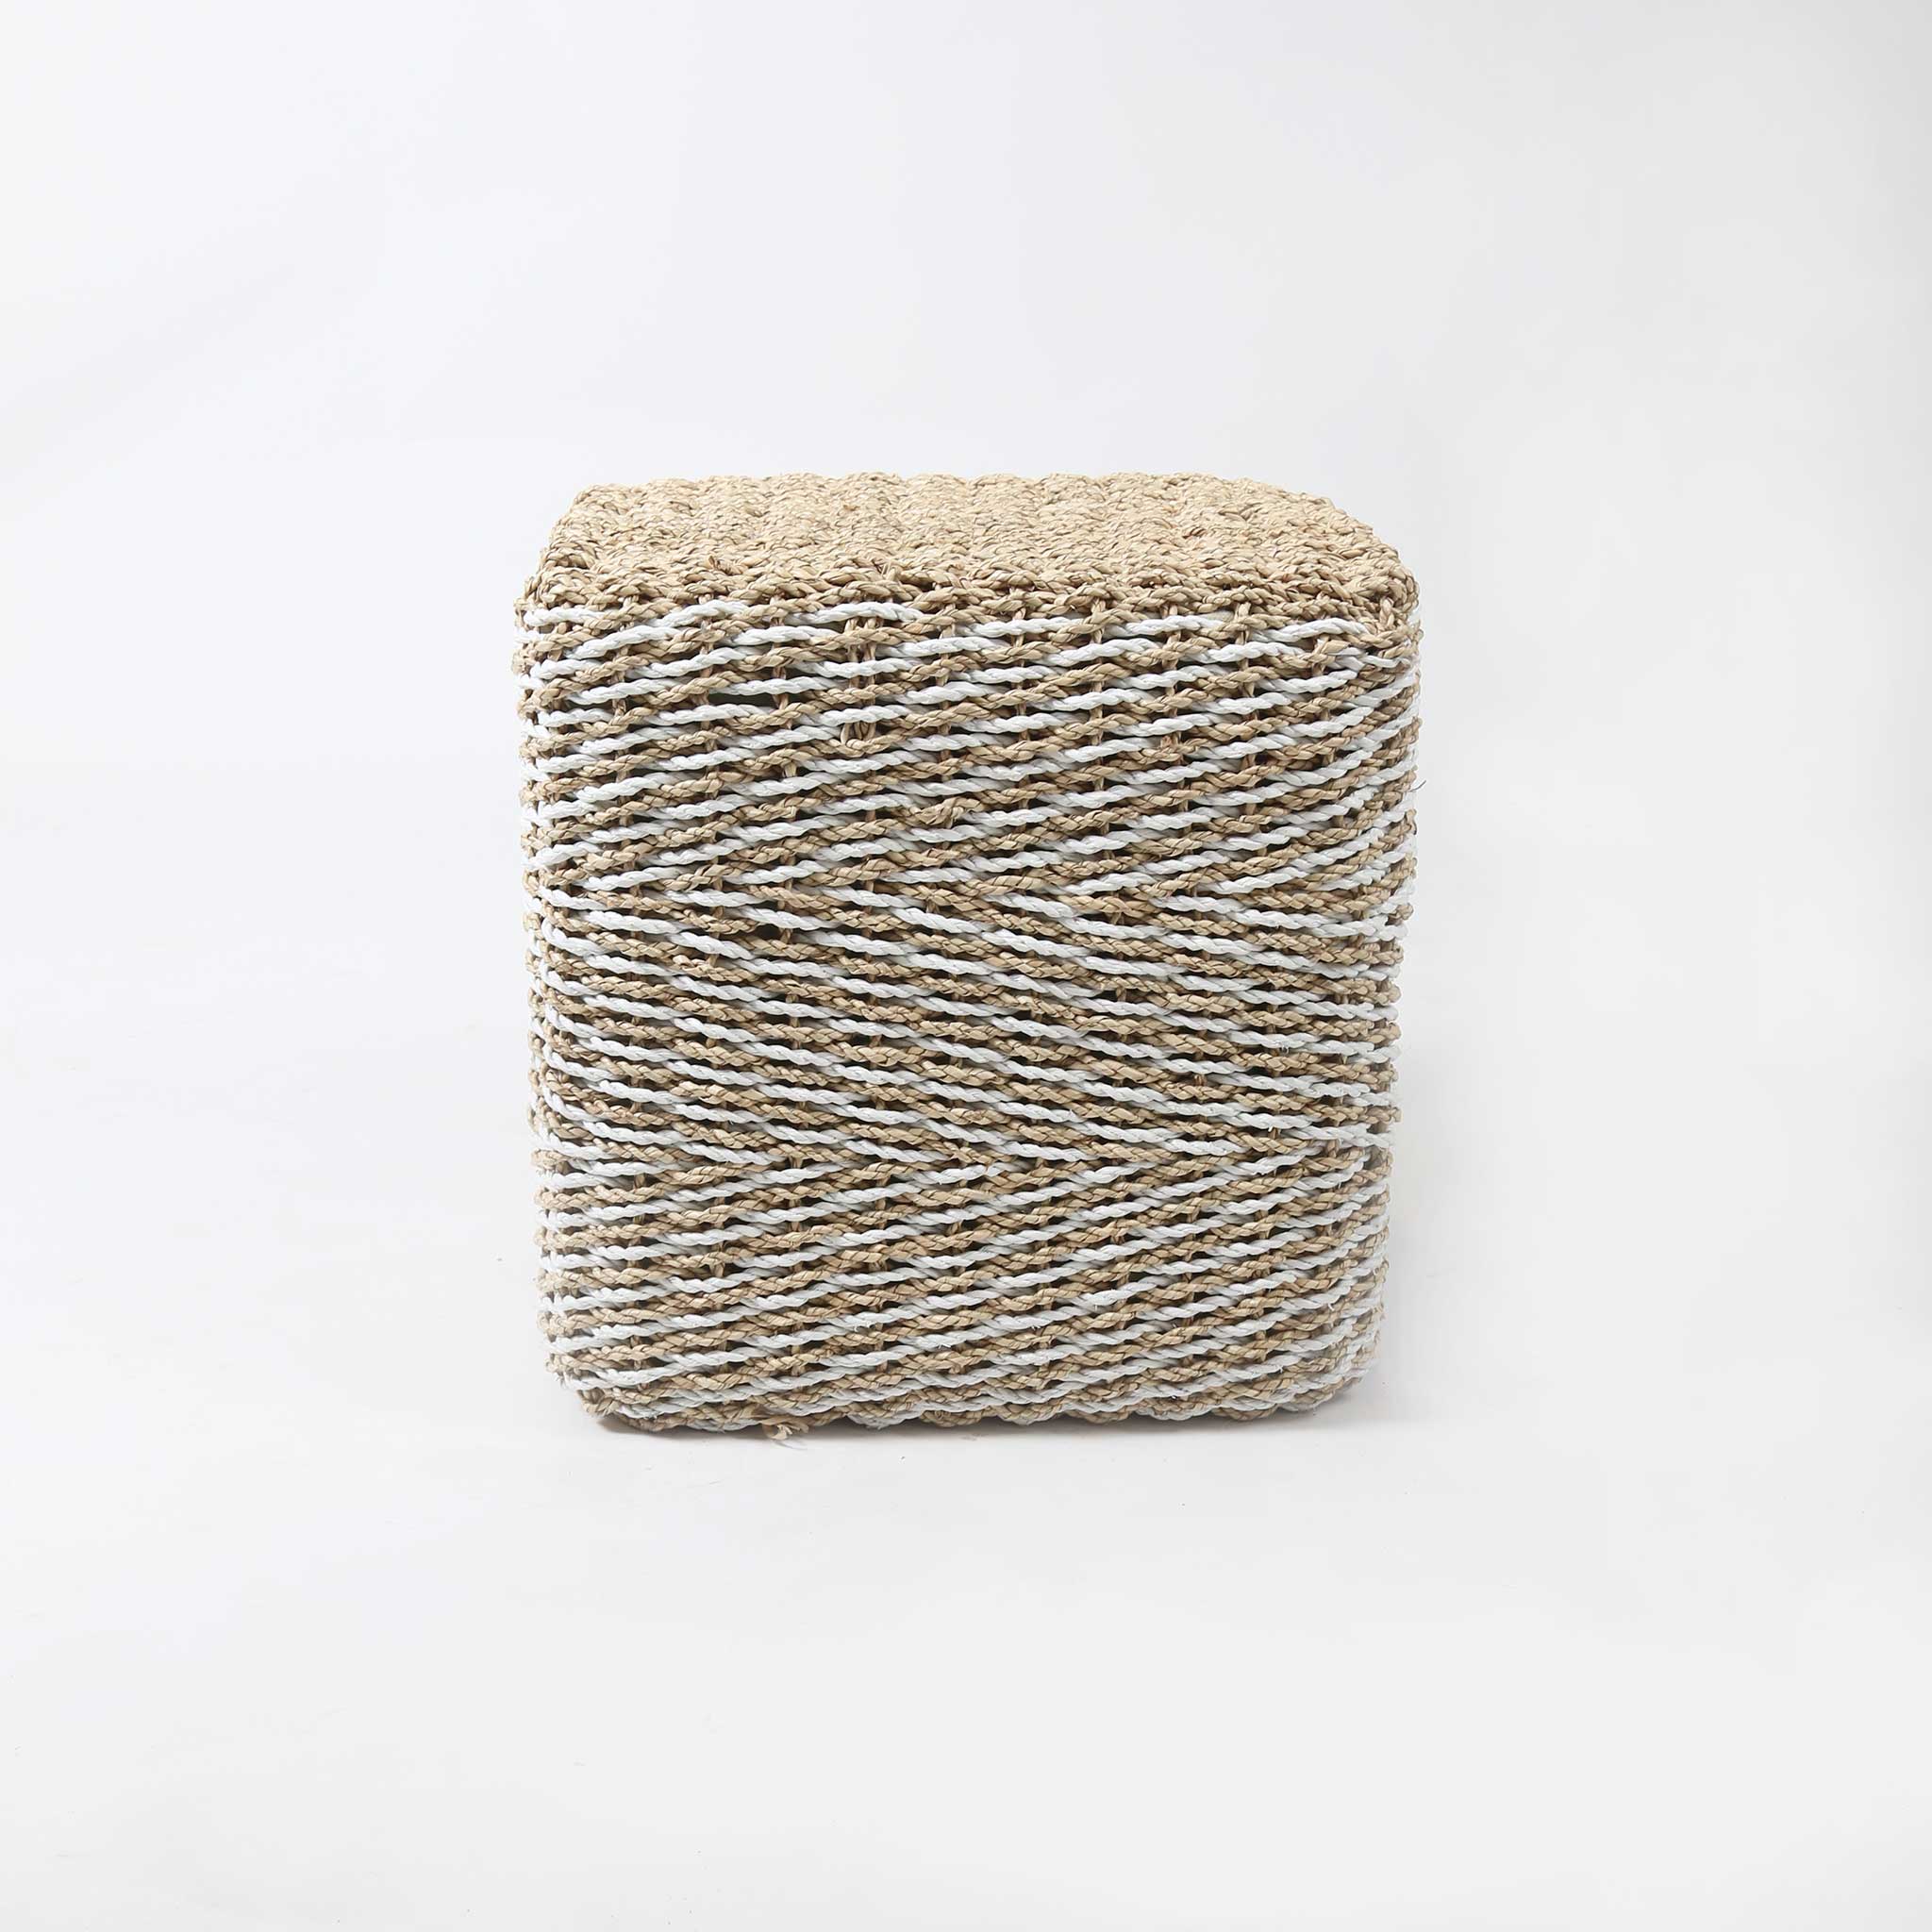 White and Natural Woven Padded Jute Stool/Sidetable